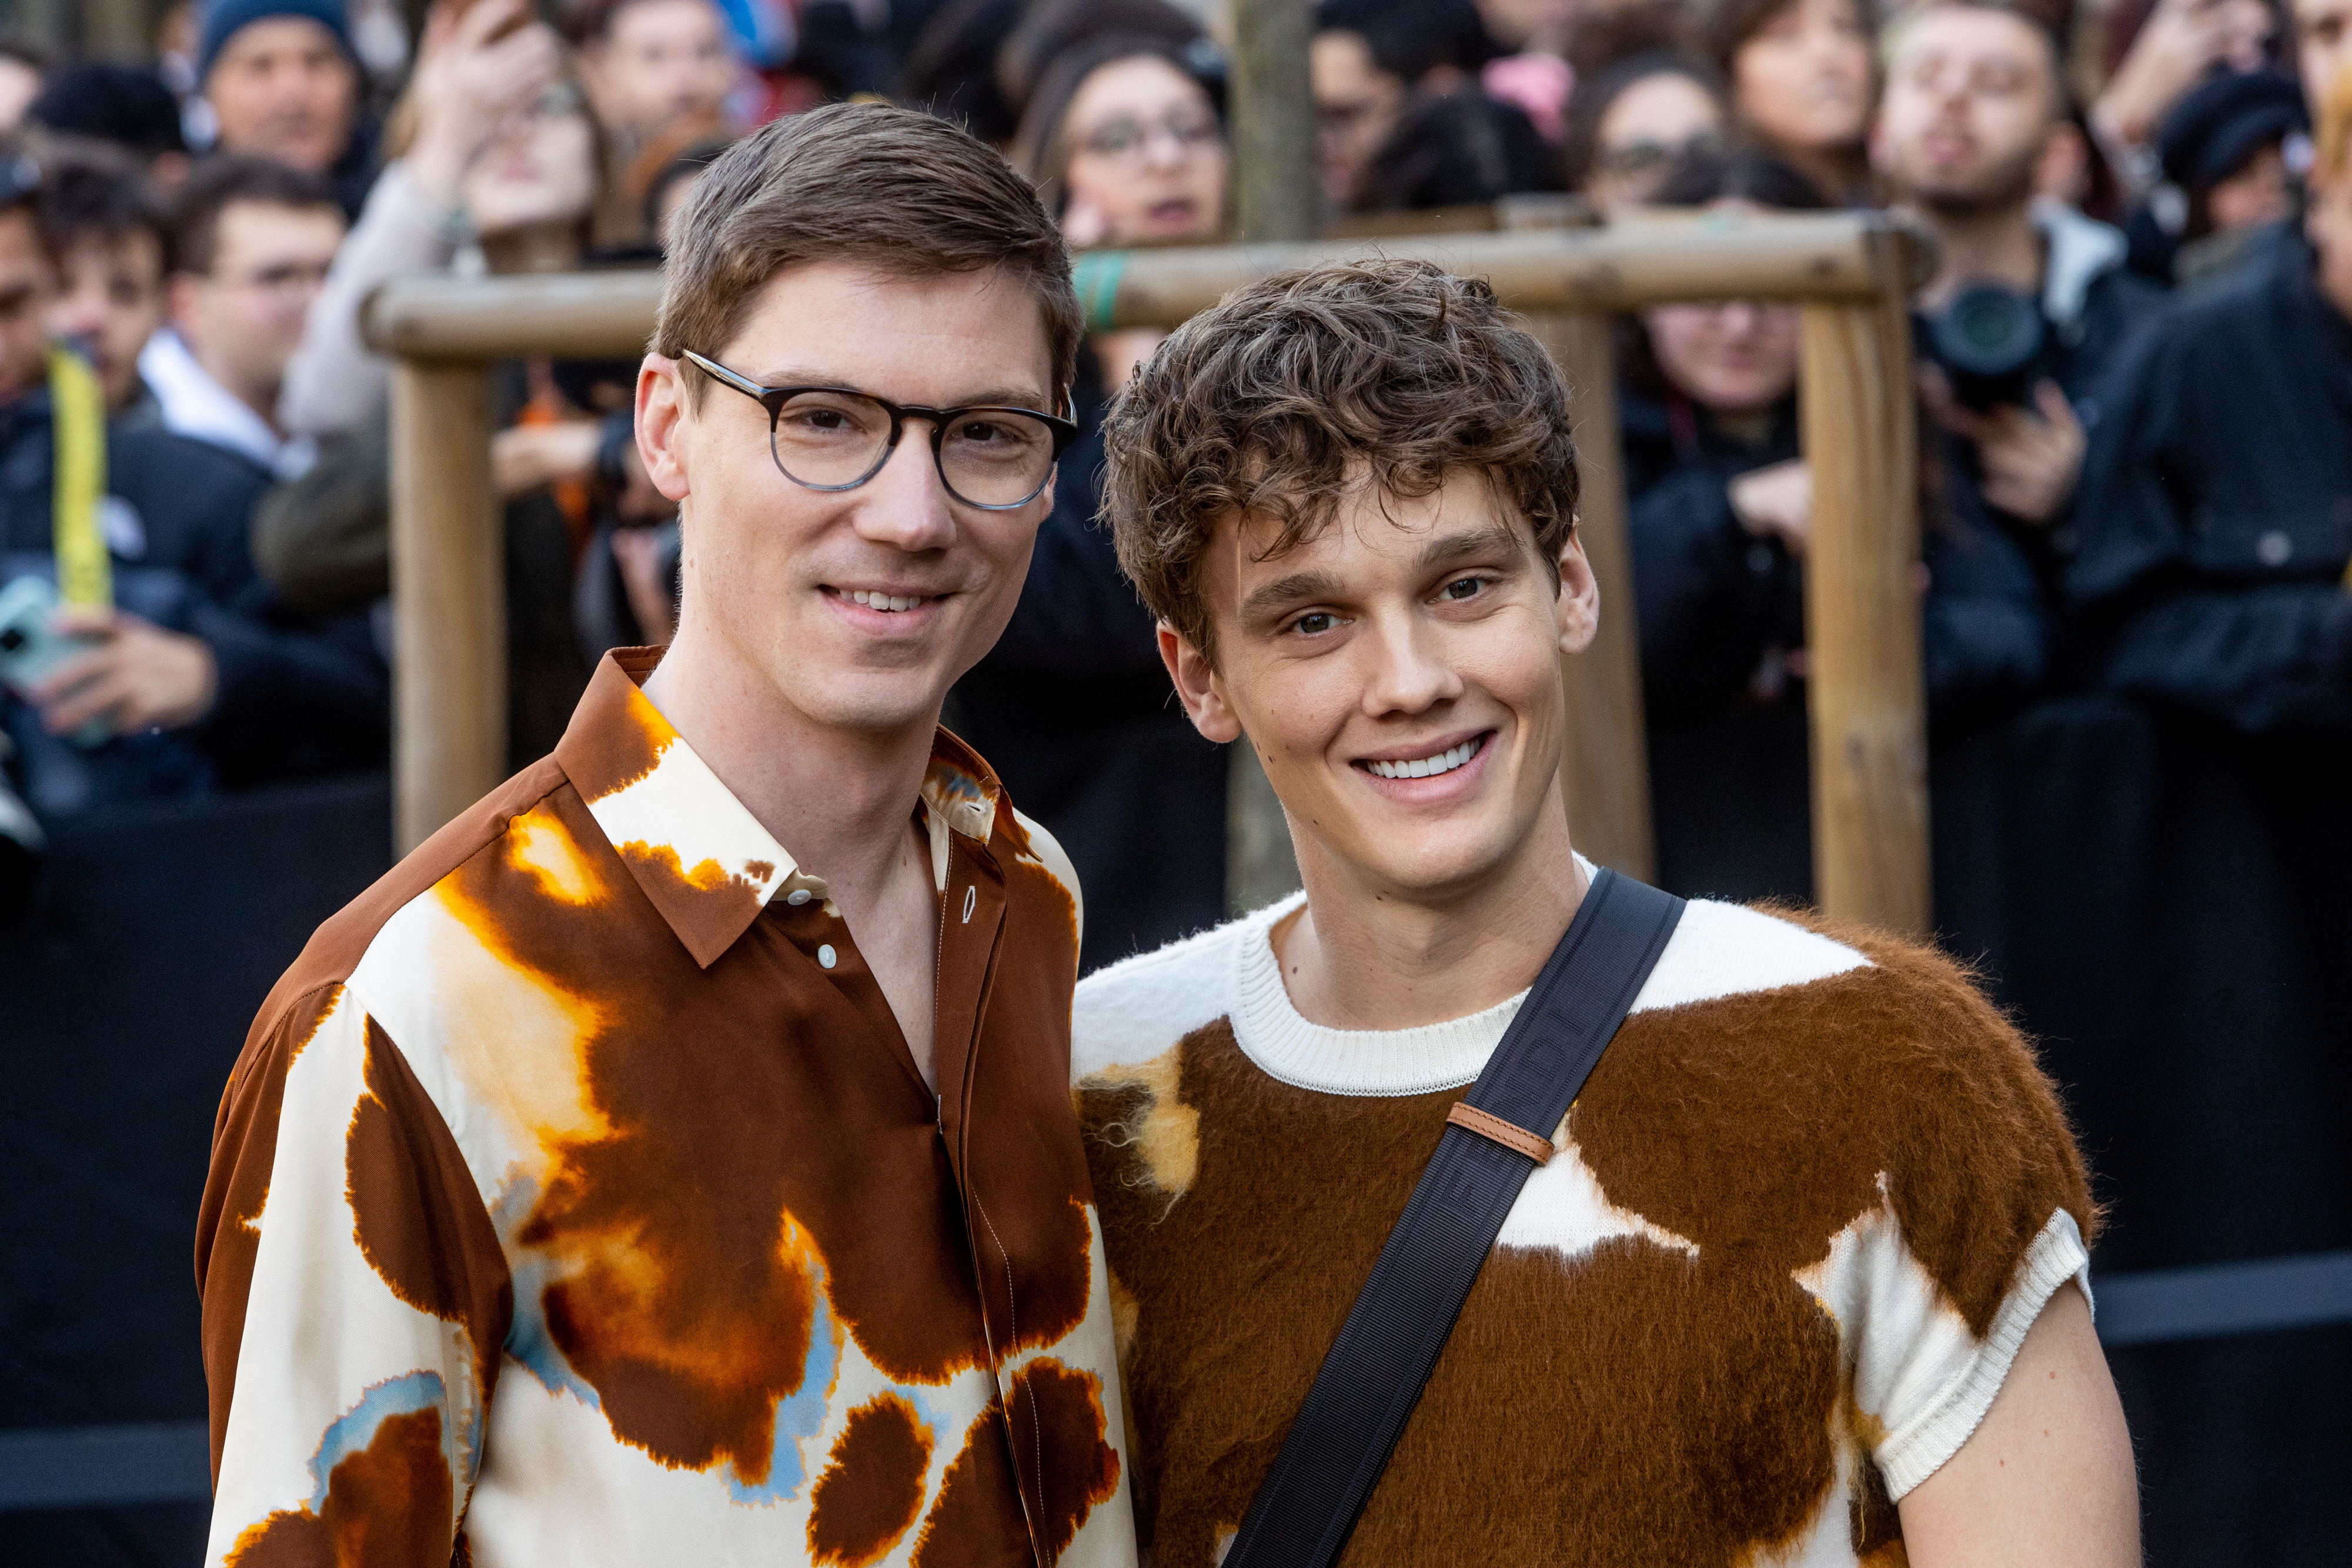 Hunter Doohan and Fielder Jewett seen at the Fendi show during the Milan Fashion Week Menswear Fall/Winter 2023/2024 in Milan on January 14, 2023 | Source: Getty Images